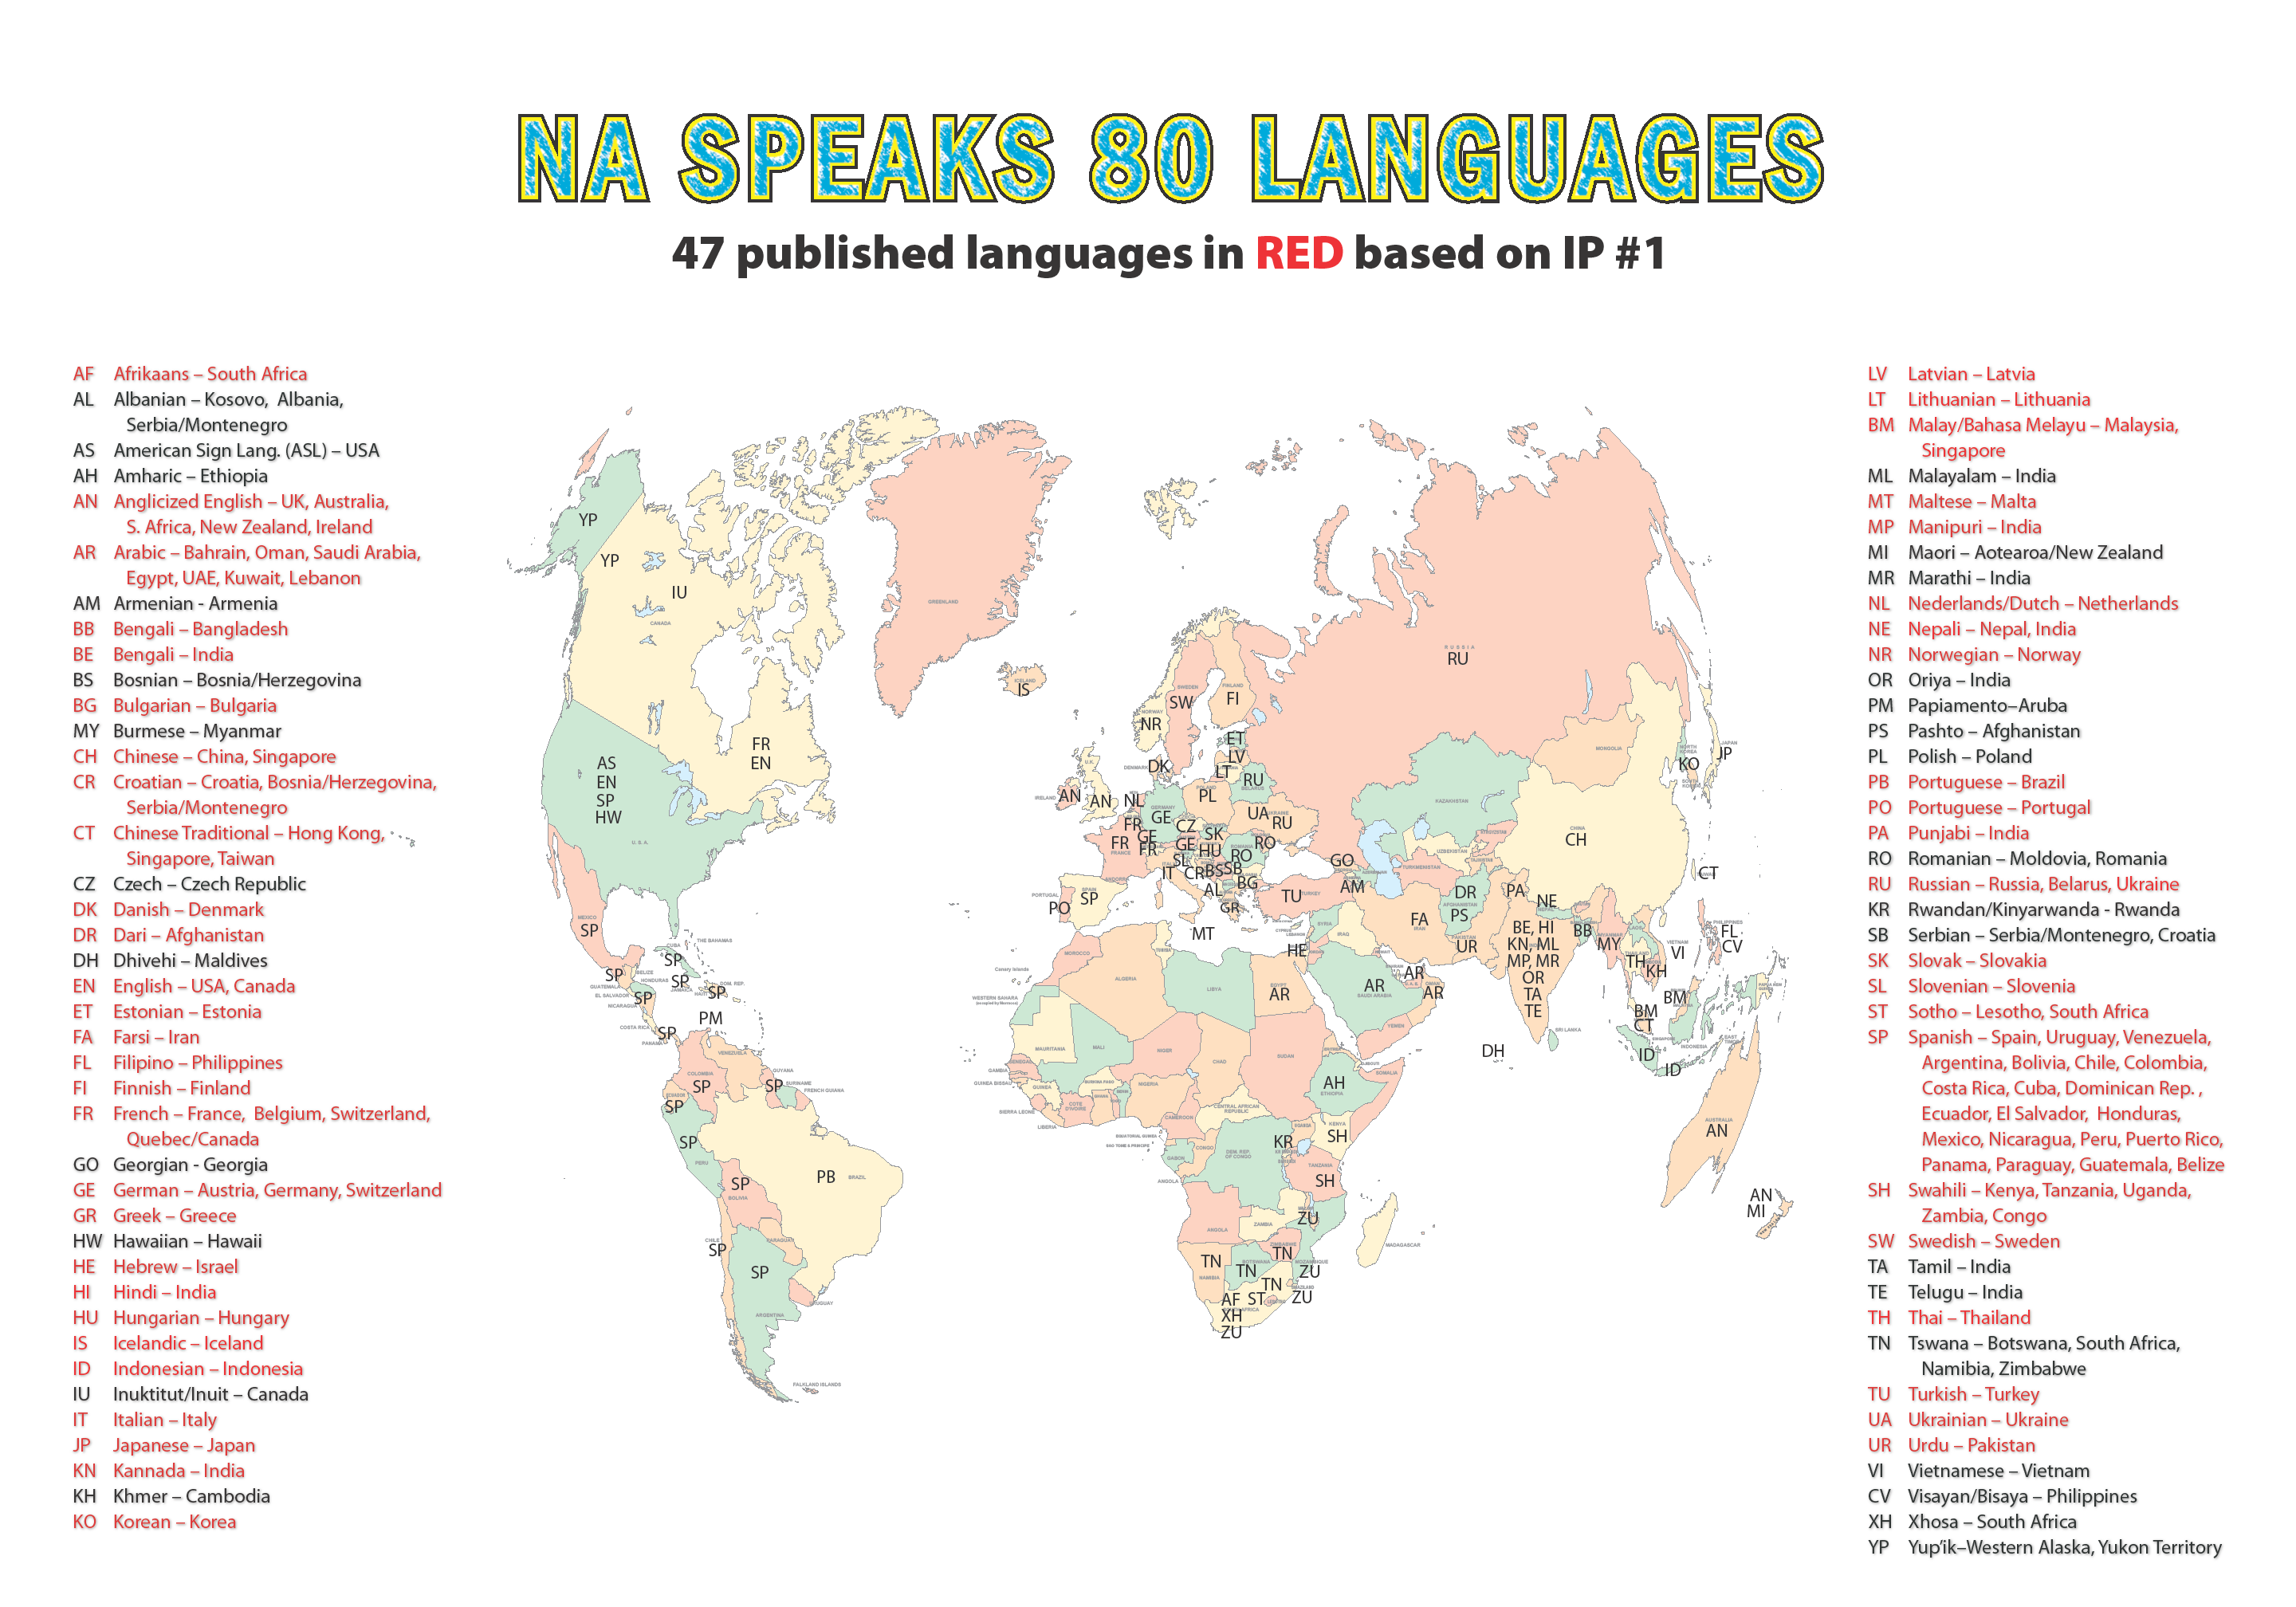 IP #1 is available in 49 languages